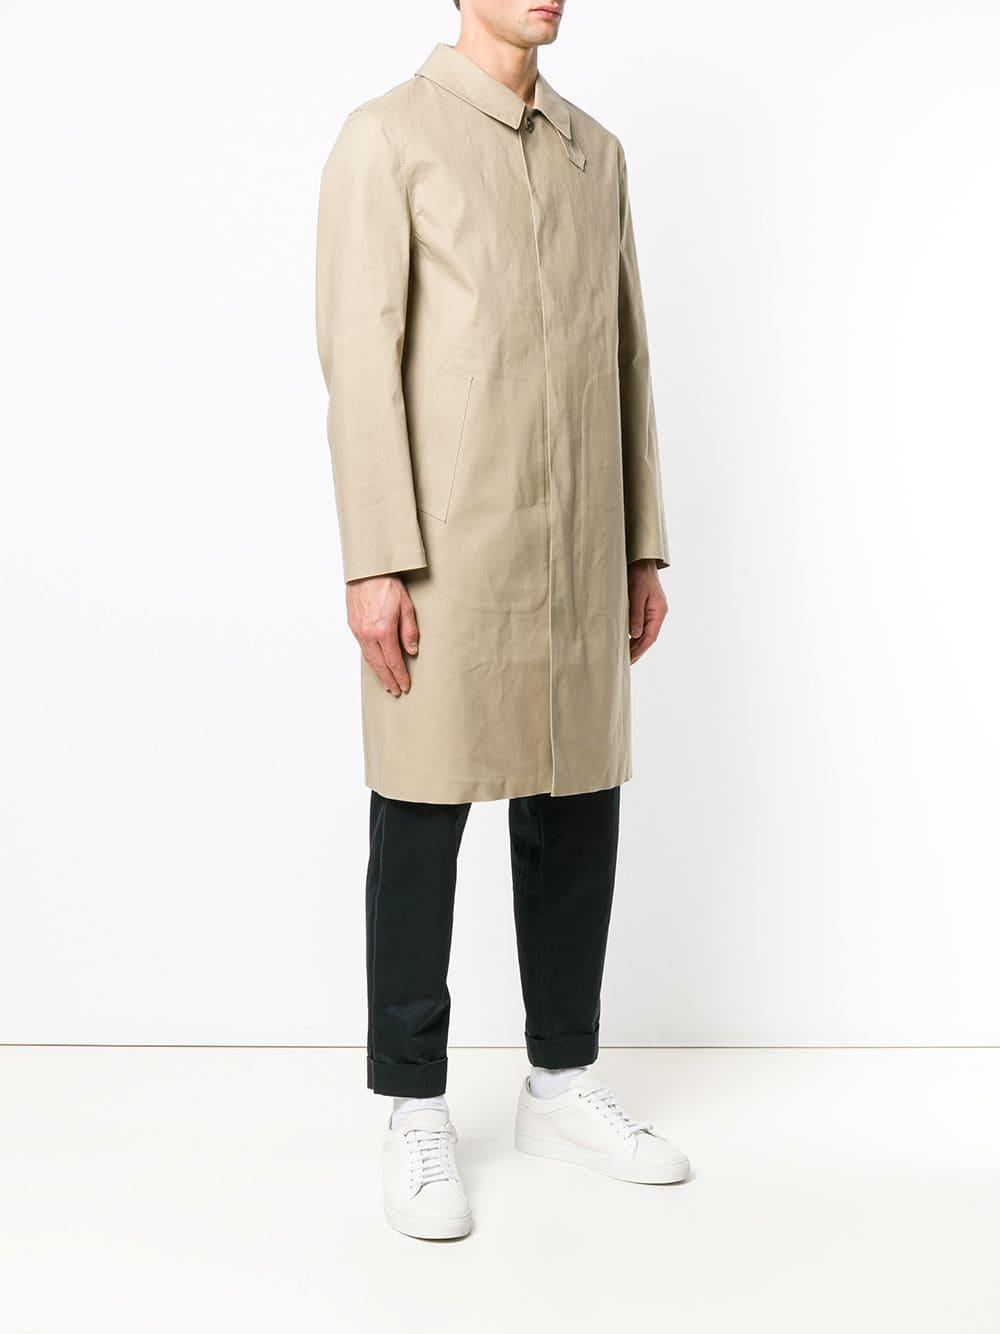 Mackintosh Fawn Bonded Cotton 3/4 Coat Gr-001 in Natural for Men - Lyst